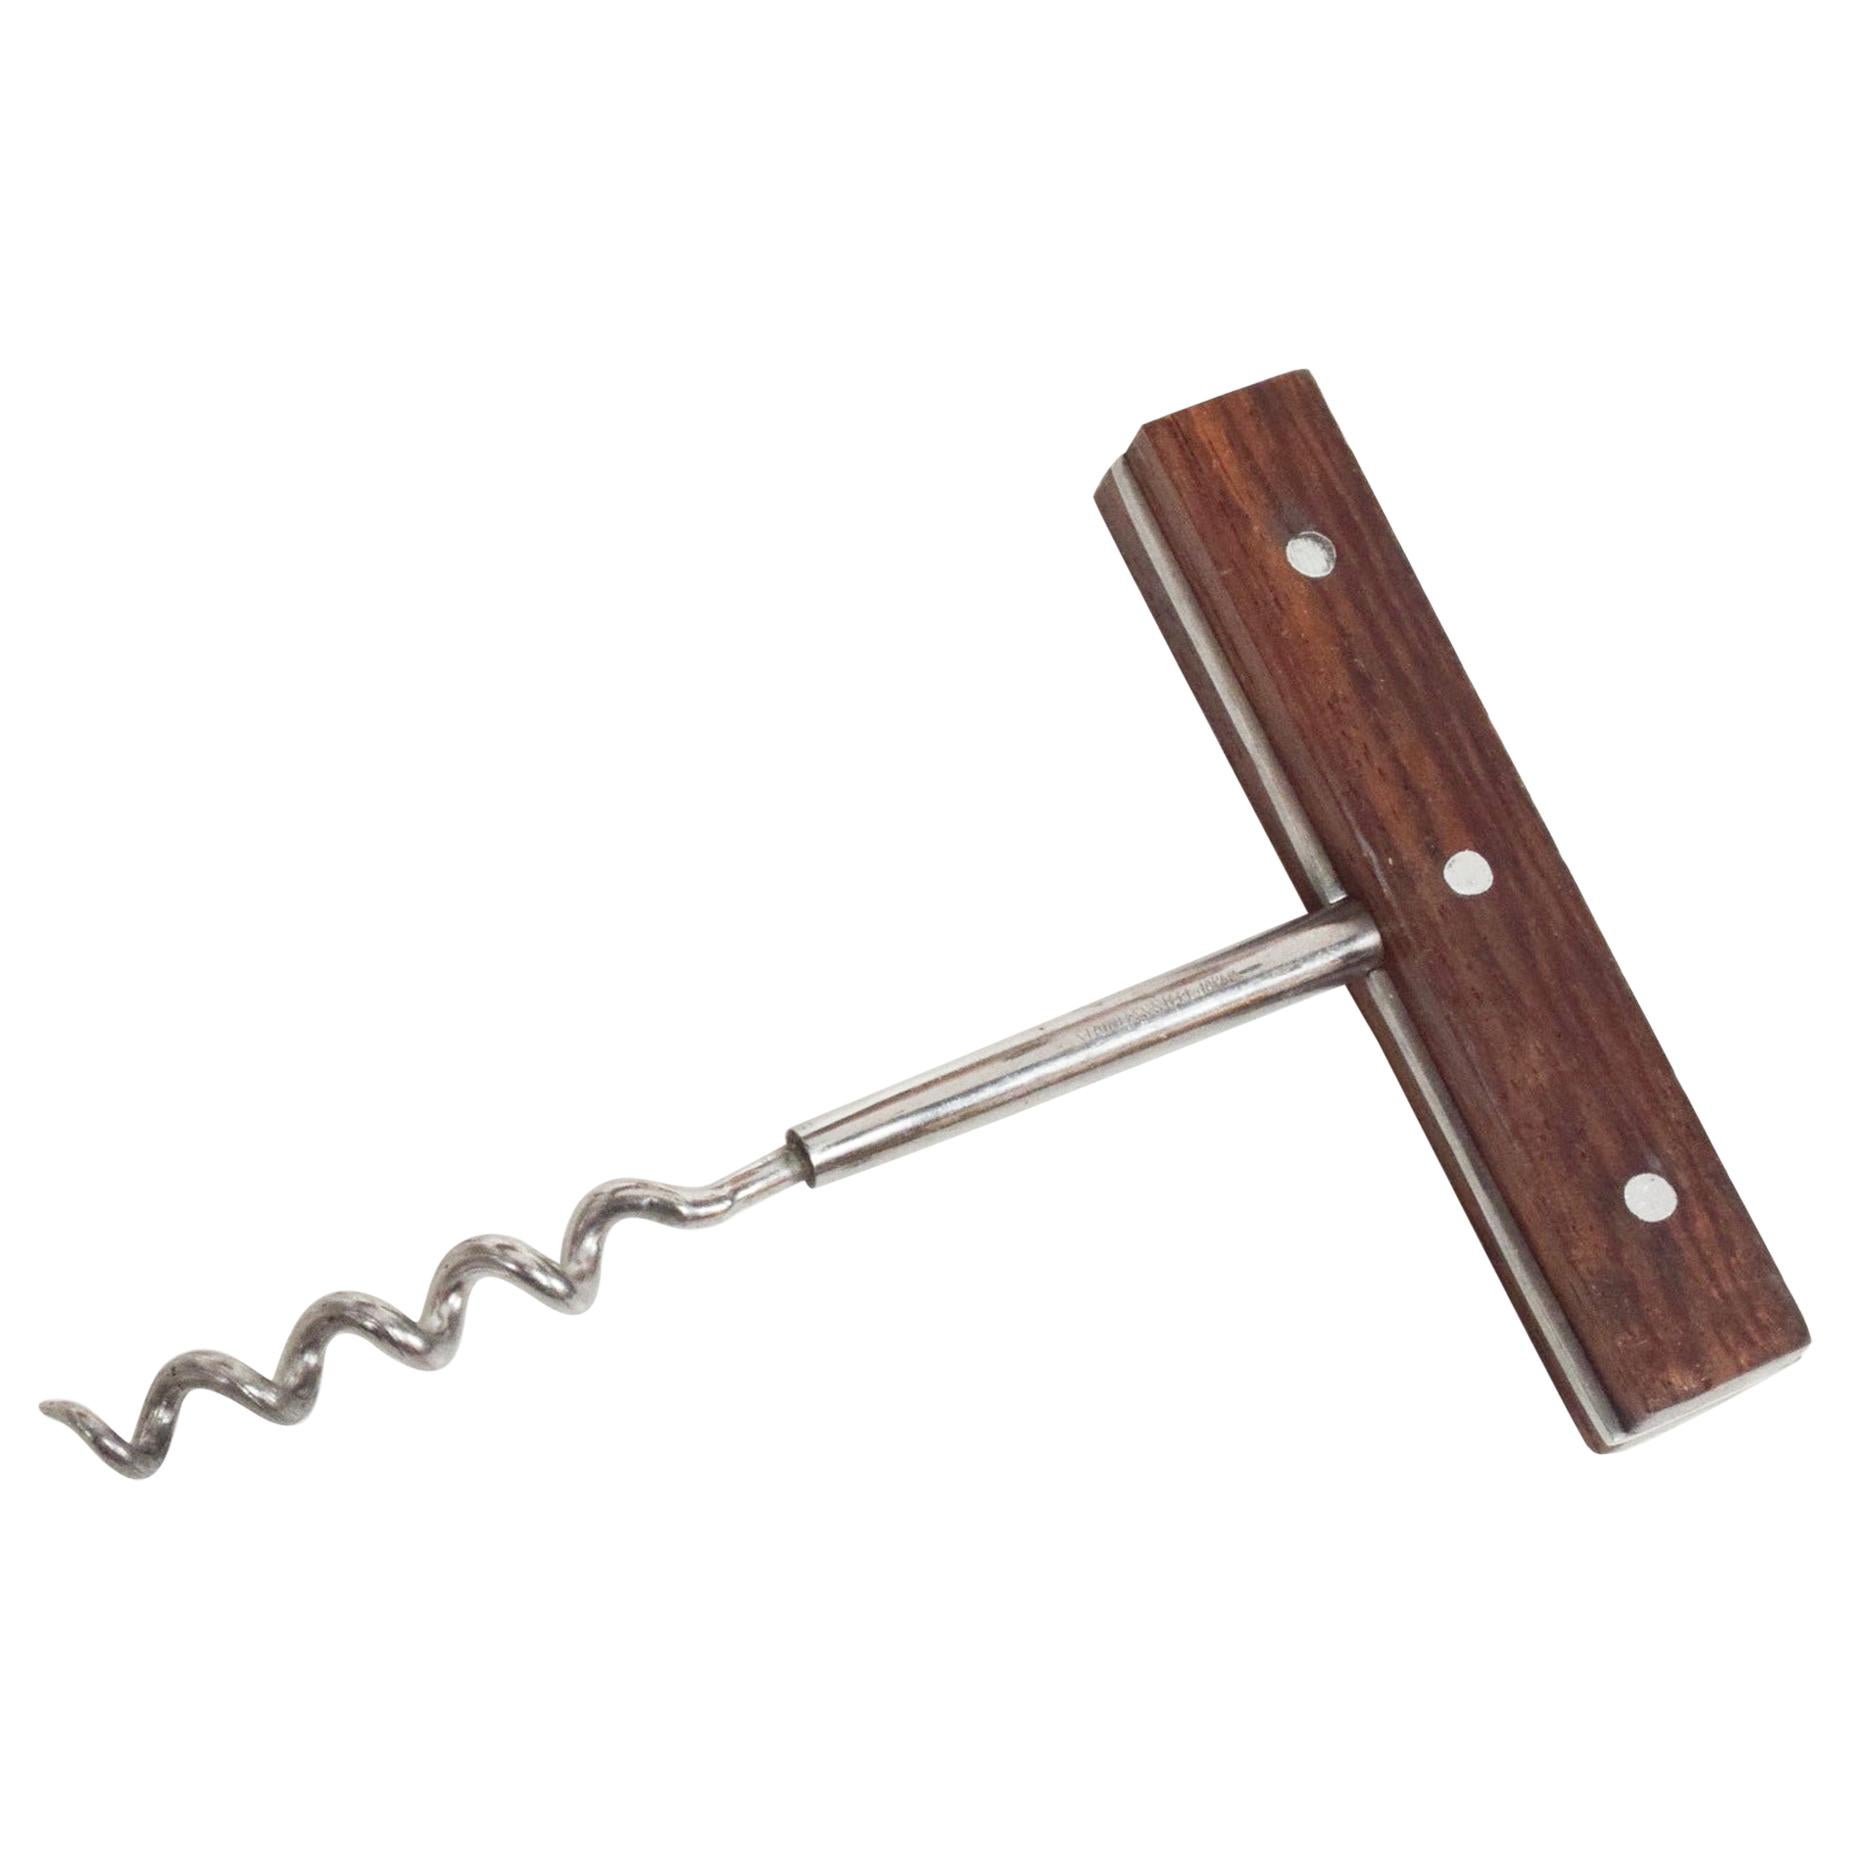 Bottle Opener
Japanese Modern Wine Bar Accessory Corkscrew Bottle Opener 
Designed in Stainless Steel with Rosewood. Circa 1960s
Stamped JAPAN
Original chrome-plated finish. Unrestored preowned vintage condition.
Measures: 4.88 x 3.5 x .63